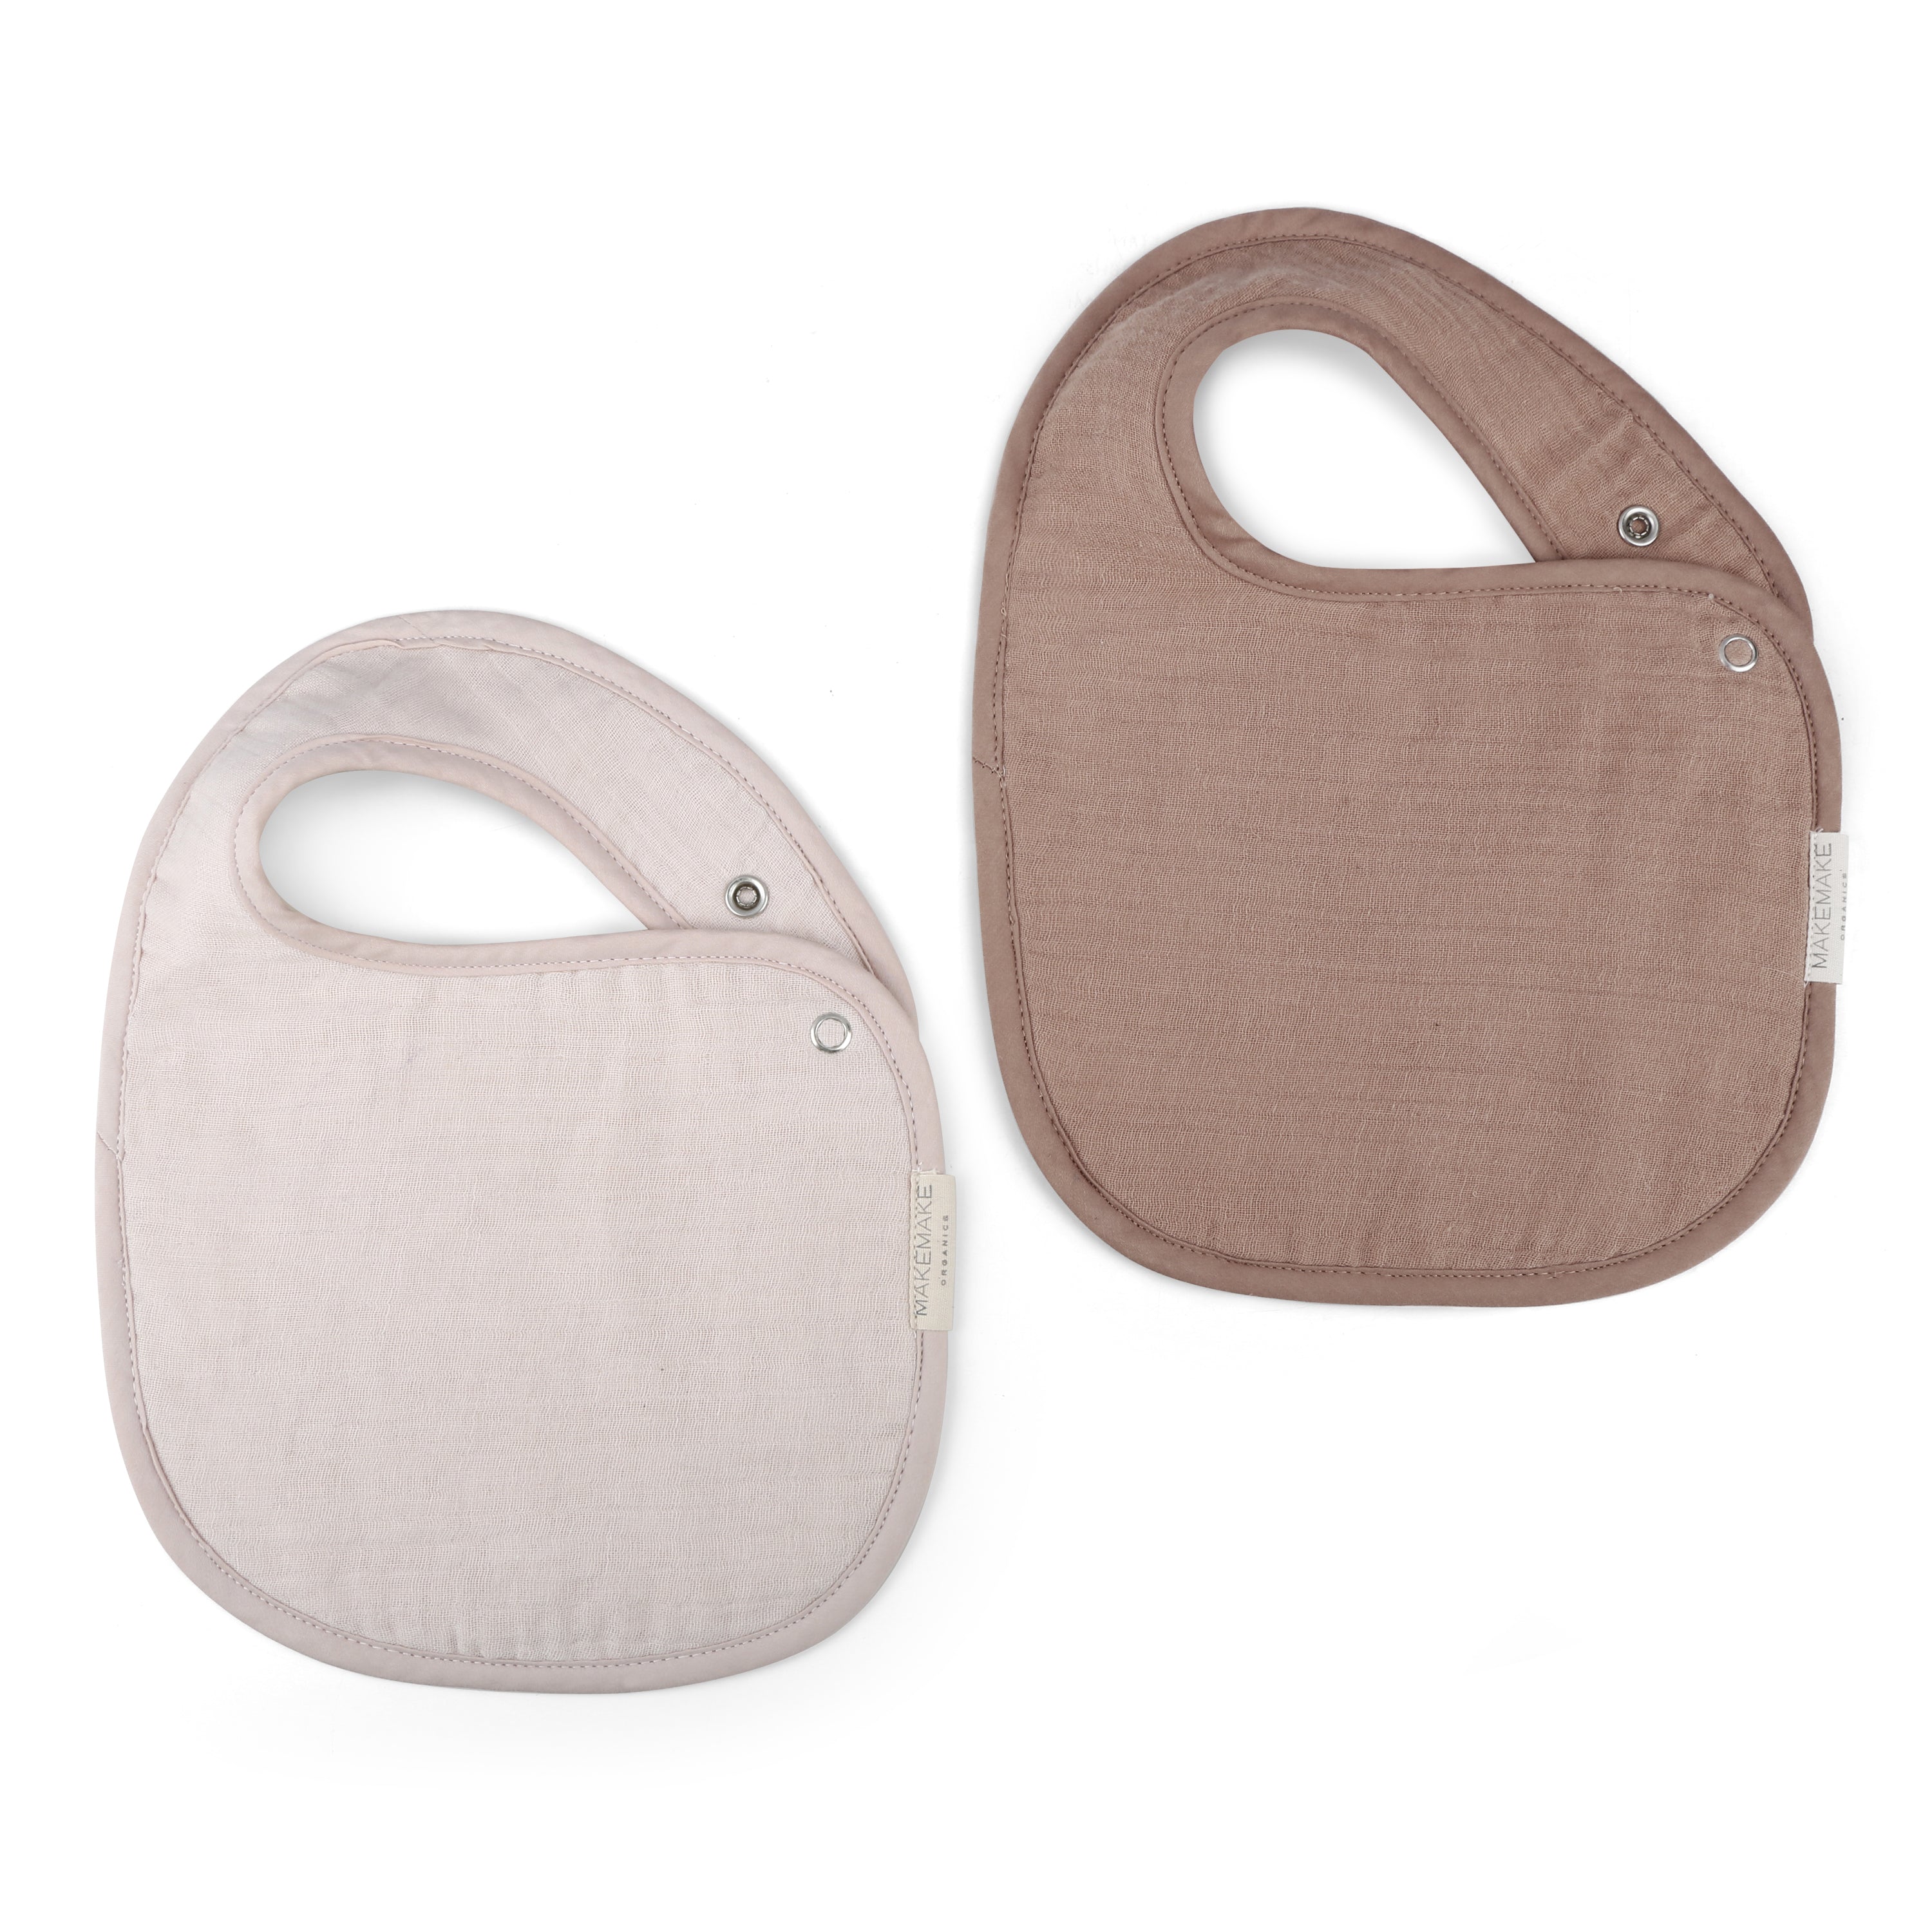 Two Organic Muslin Bibs - Blush Oat & Pecan by Makemake Organics, one pink and one brown, displayed side by side on a white background, each with snap closures visible.